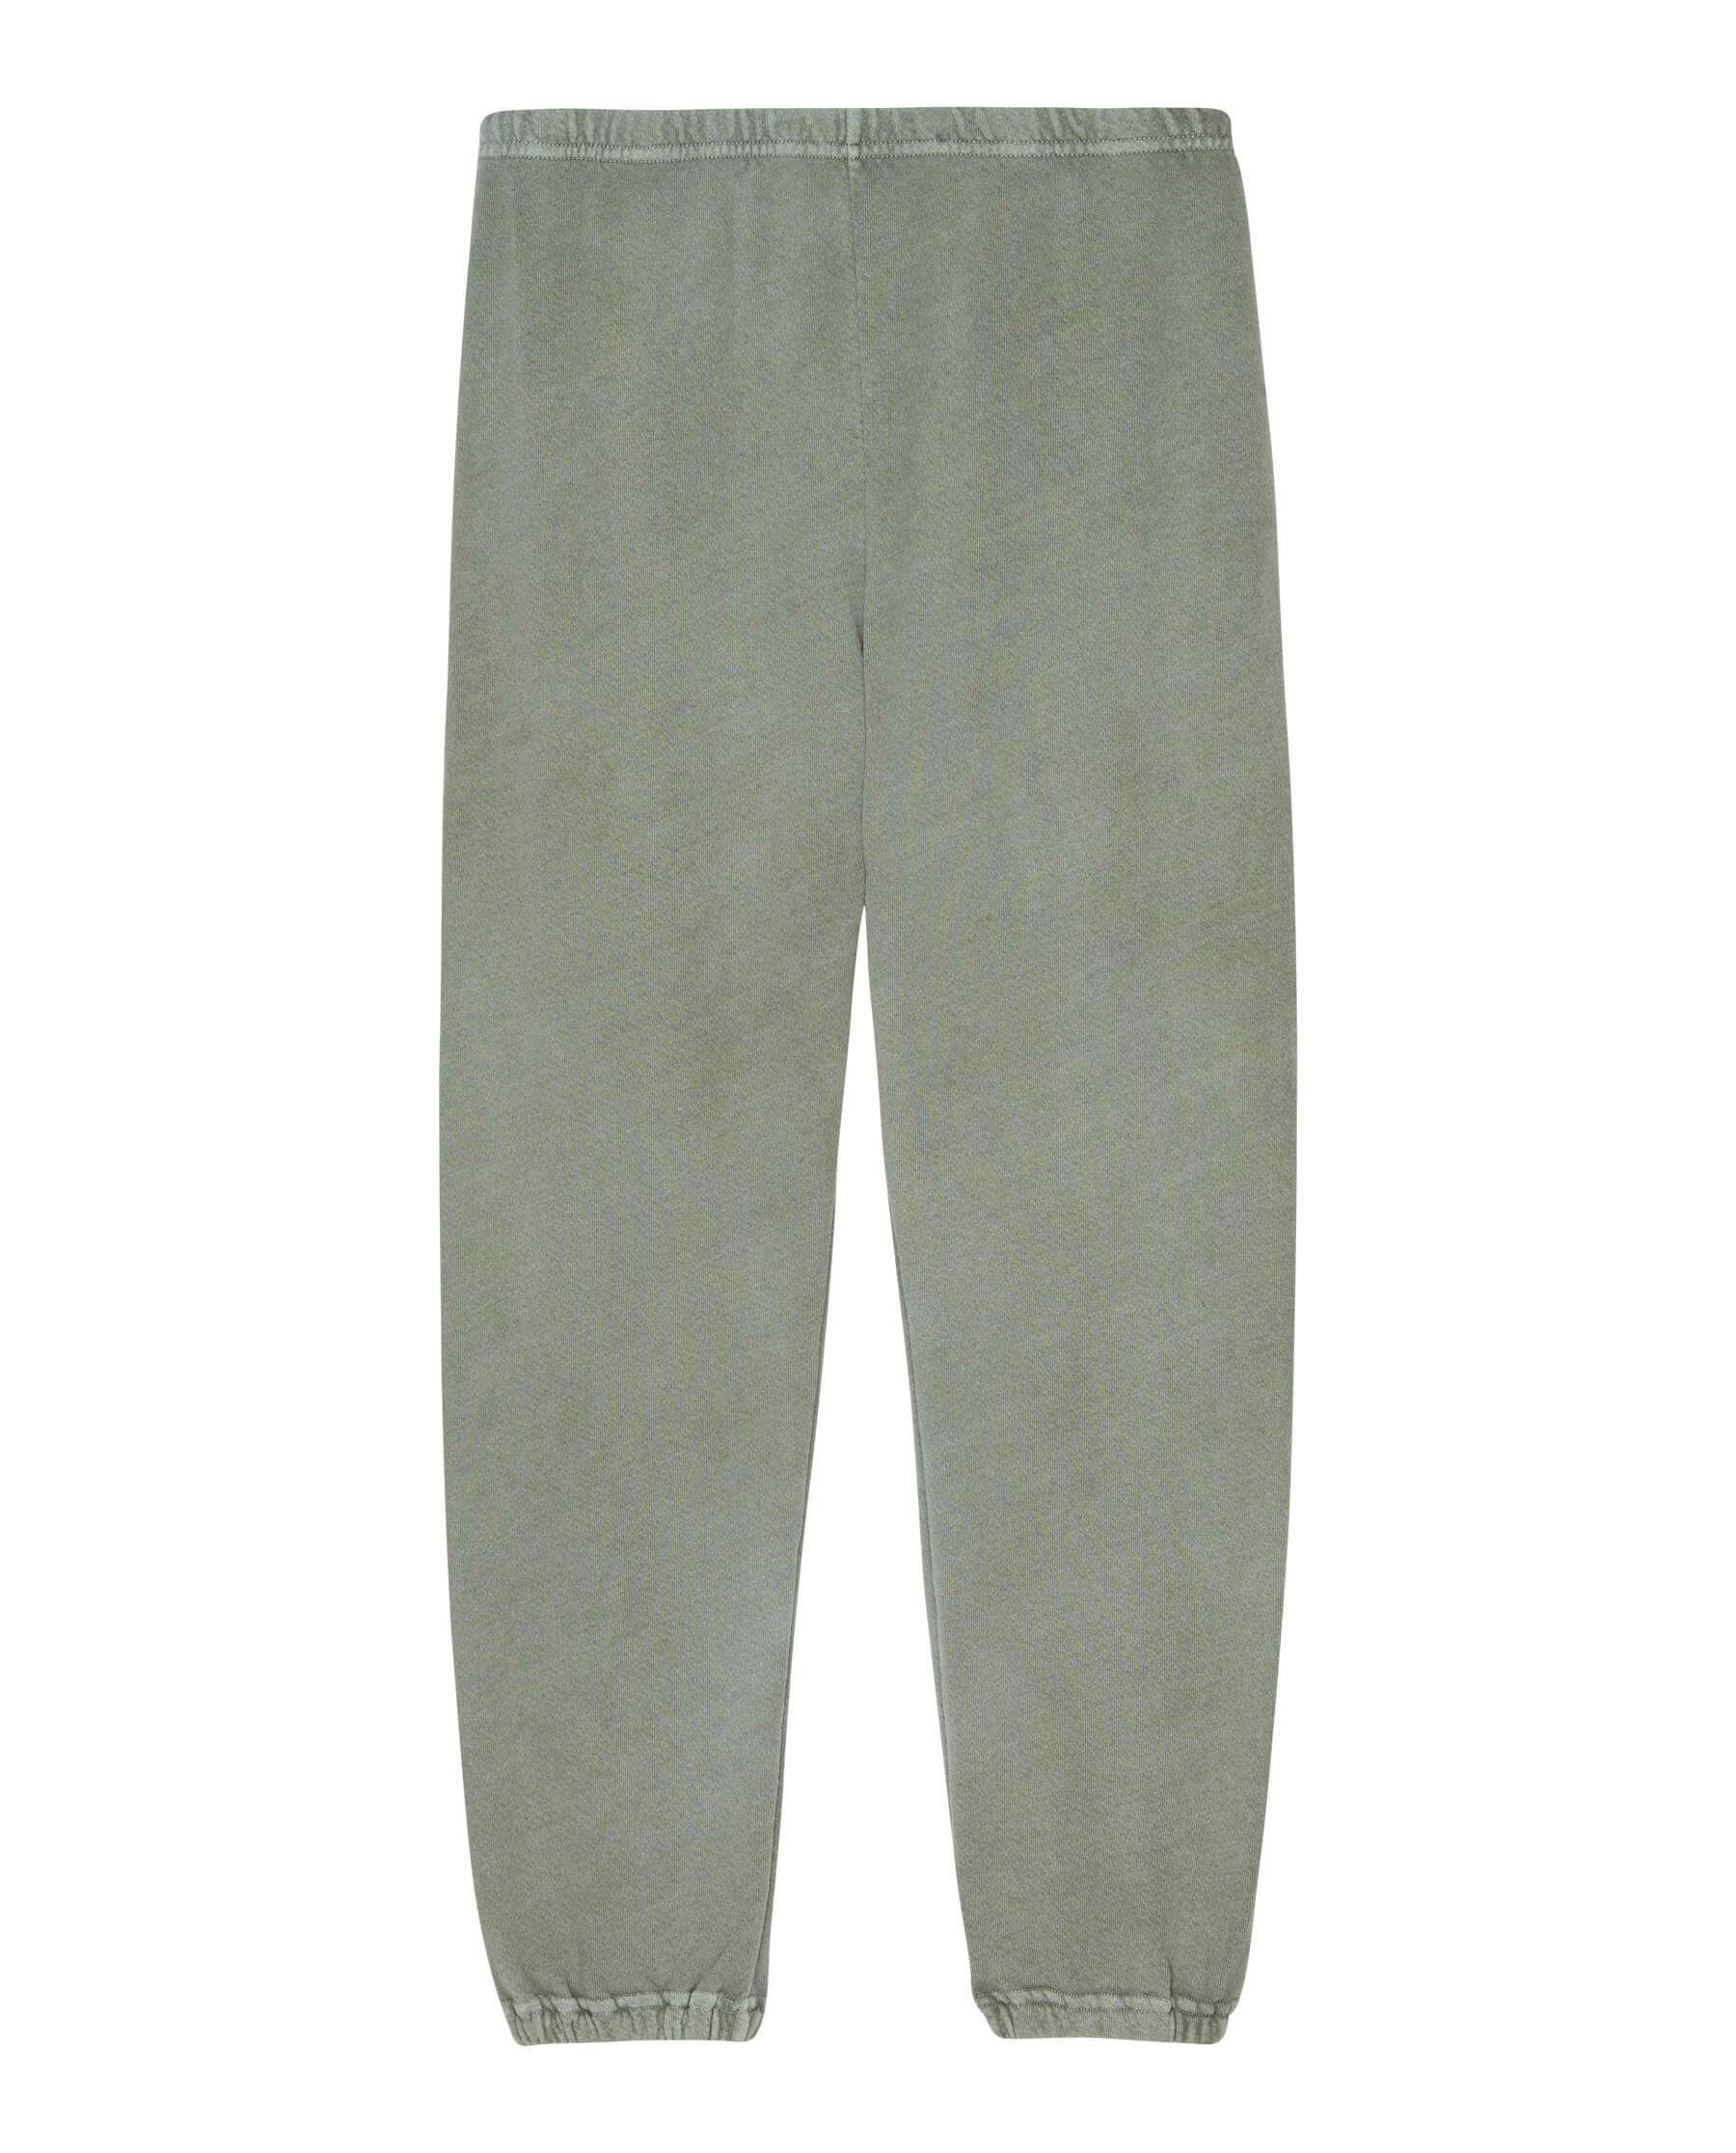 The Stadium Sweatpant. Solid -- Sweetgrass SWEATPANTS THE GREAT. SP23 KNITS